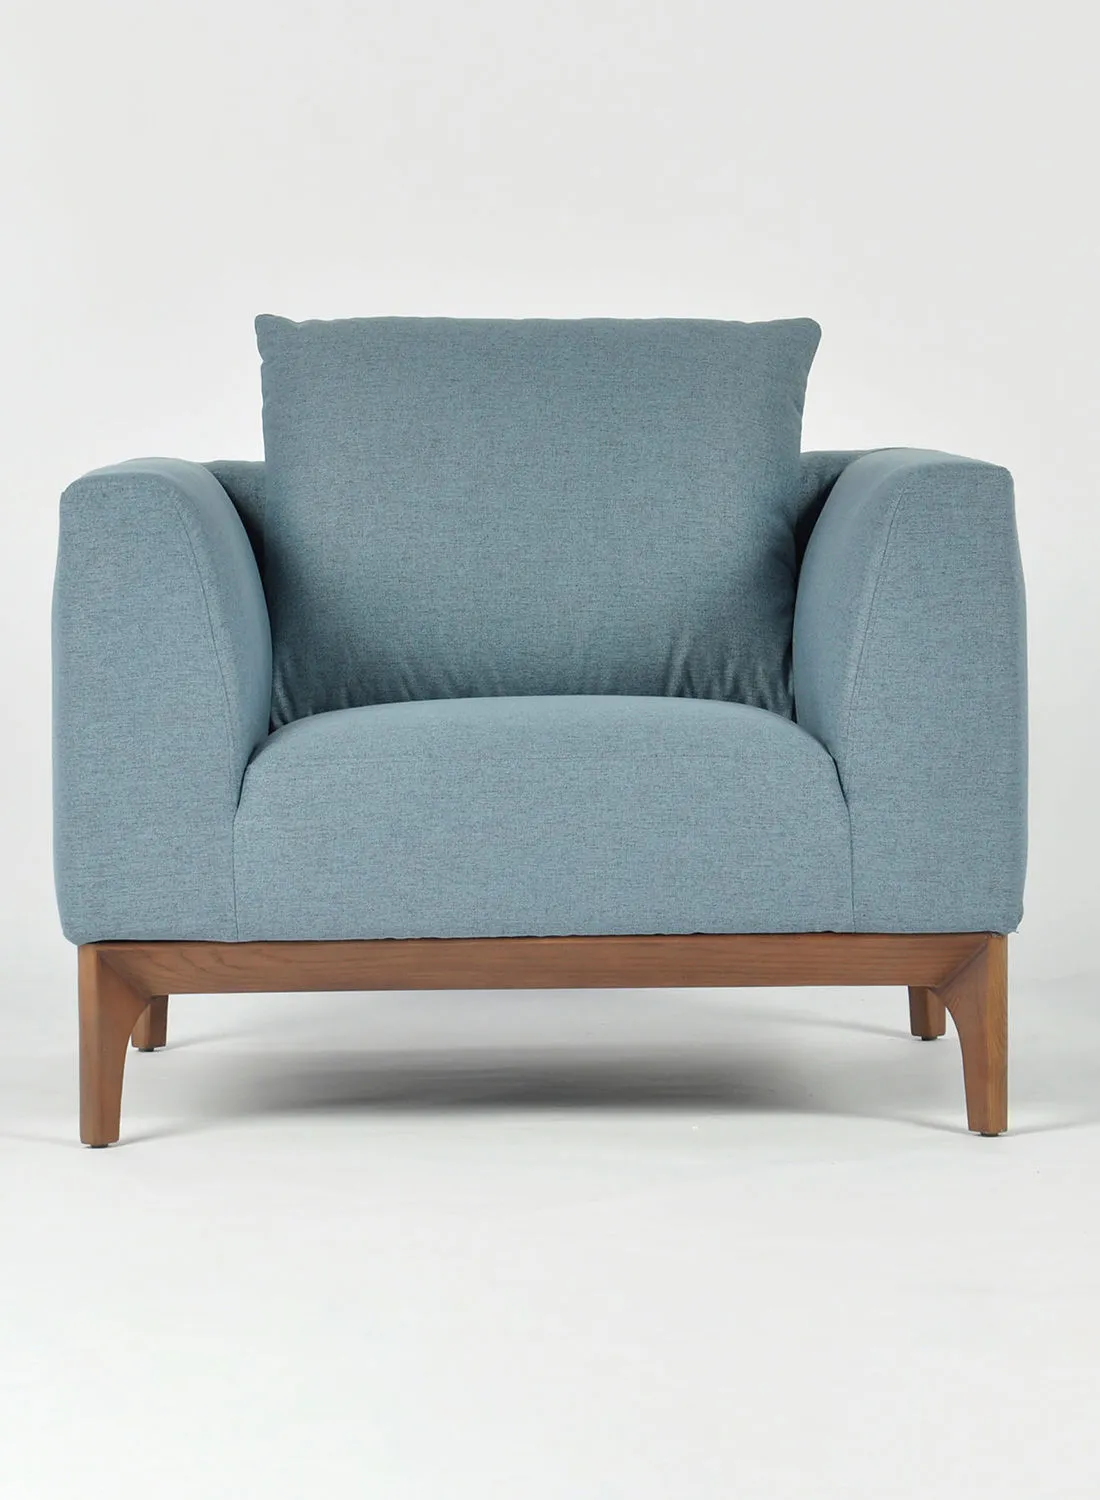 Switch Armchair - Upholstered Fabric Blue Couch - 97 X 88 X80cm - Relaxing Sofa